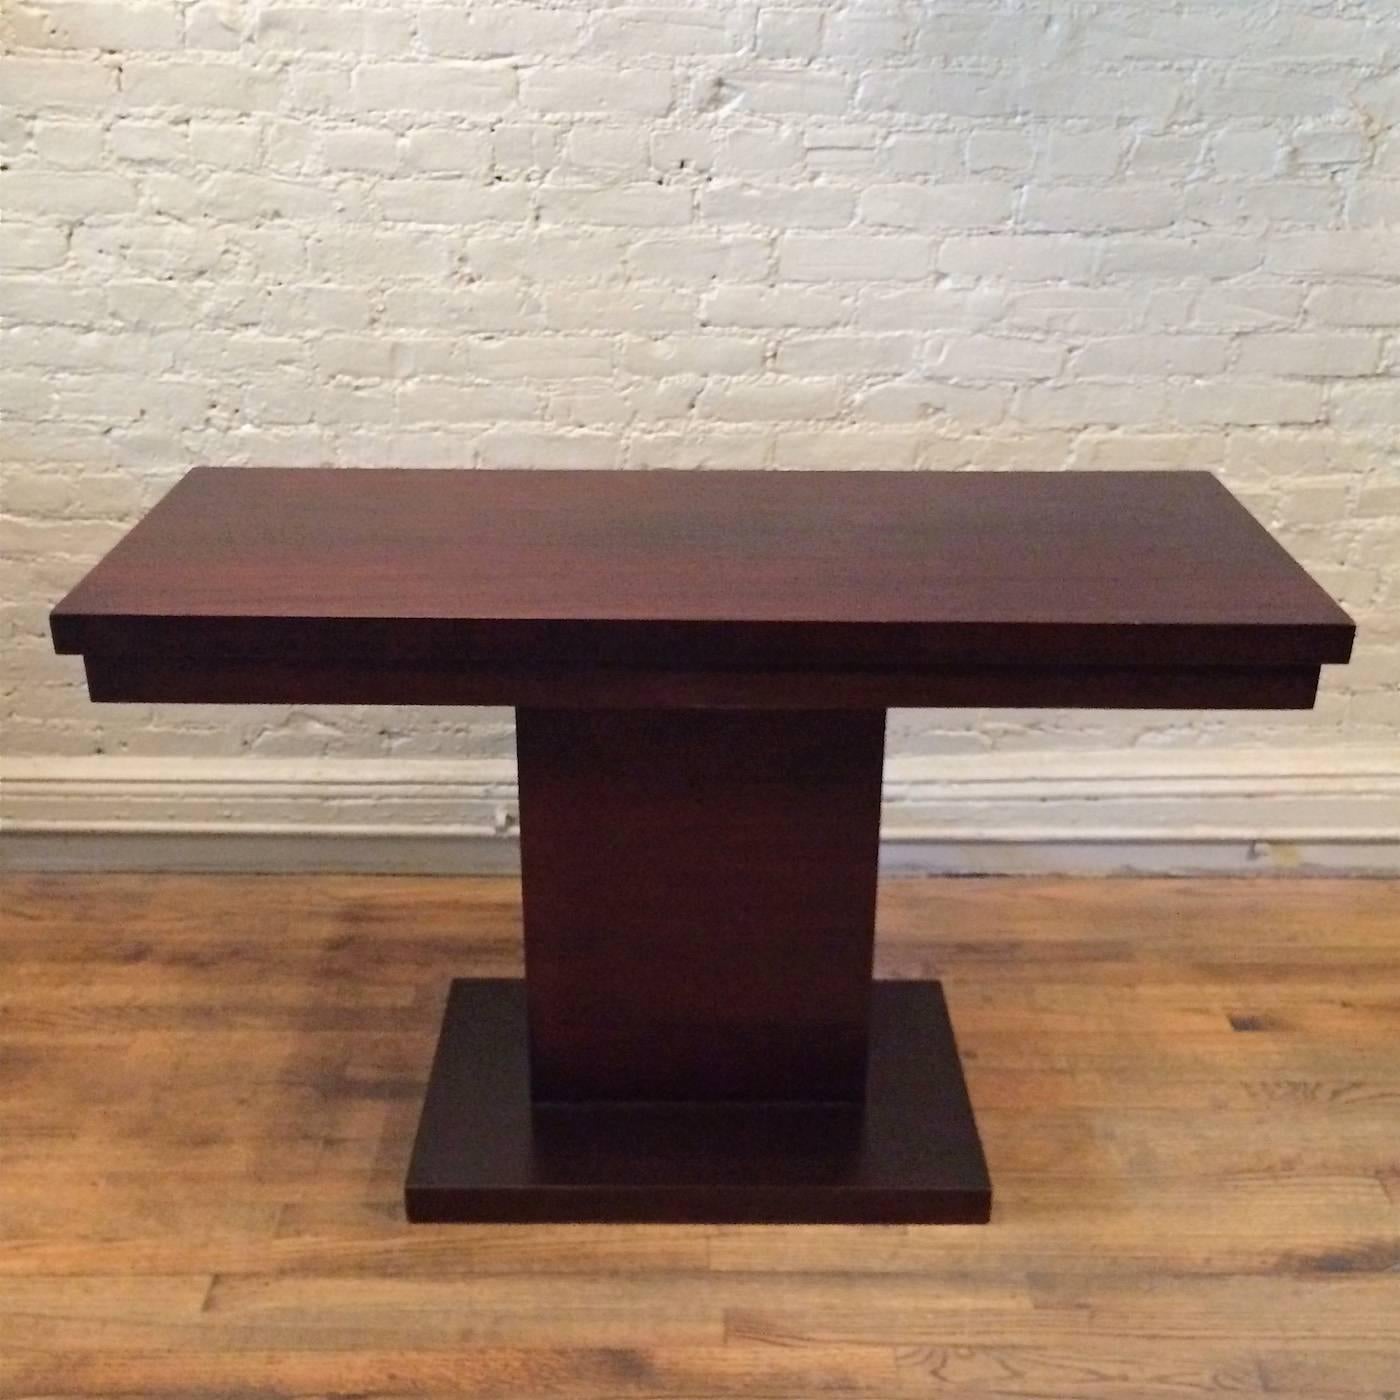 Well proportioned, Mid-Century, mahogany, console table, circa 1940s works as an entryway or focal point console.